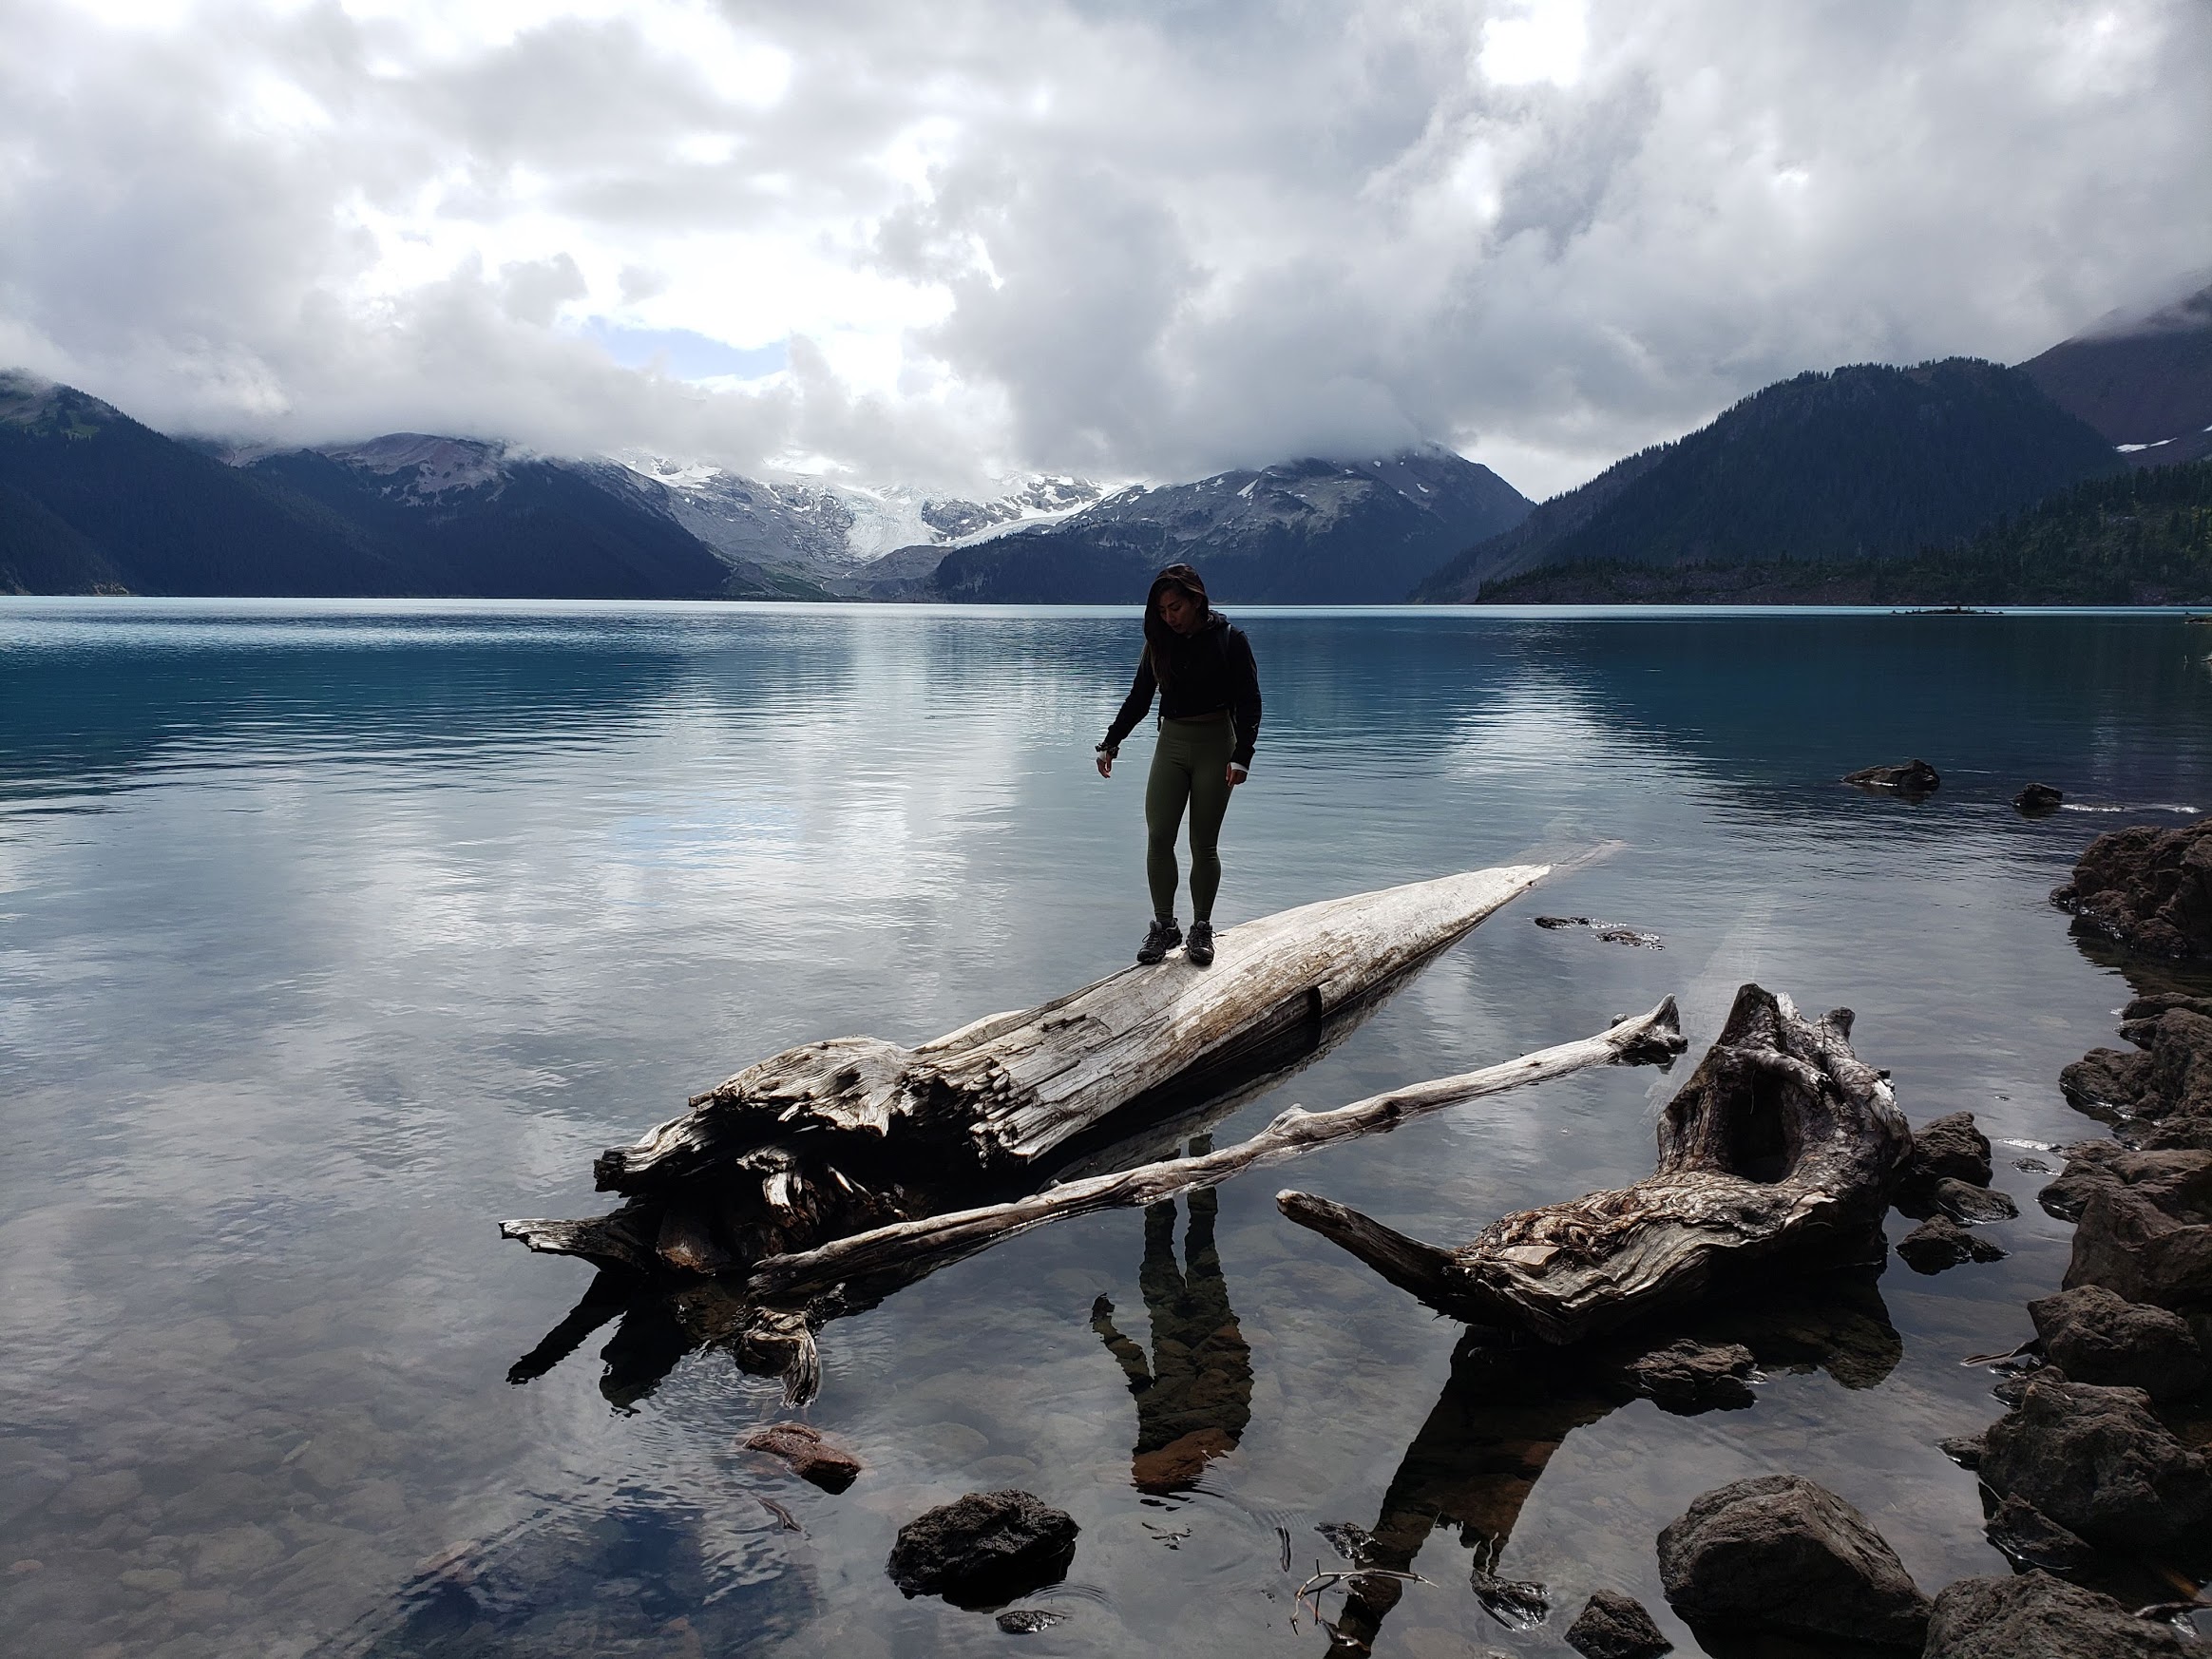 Garibaldi Lake, Me standing on a log in the middle of the lake